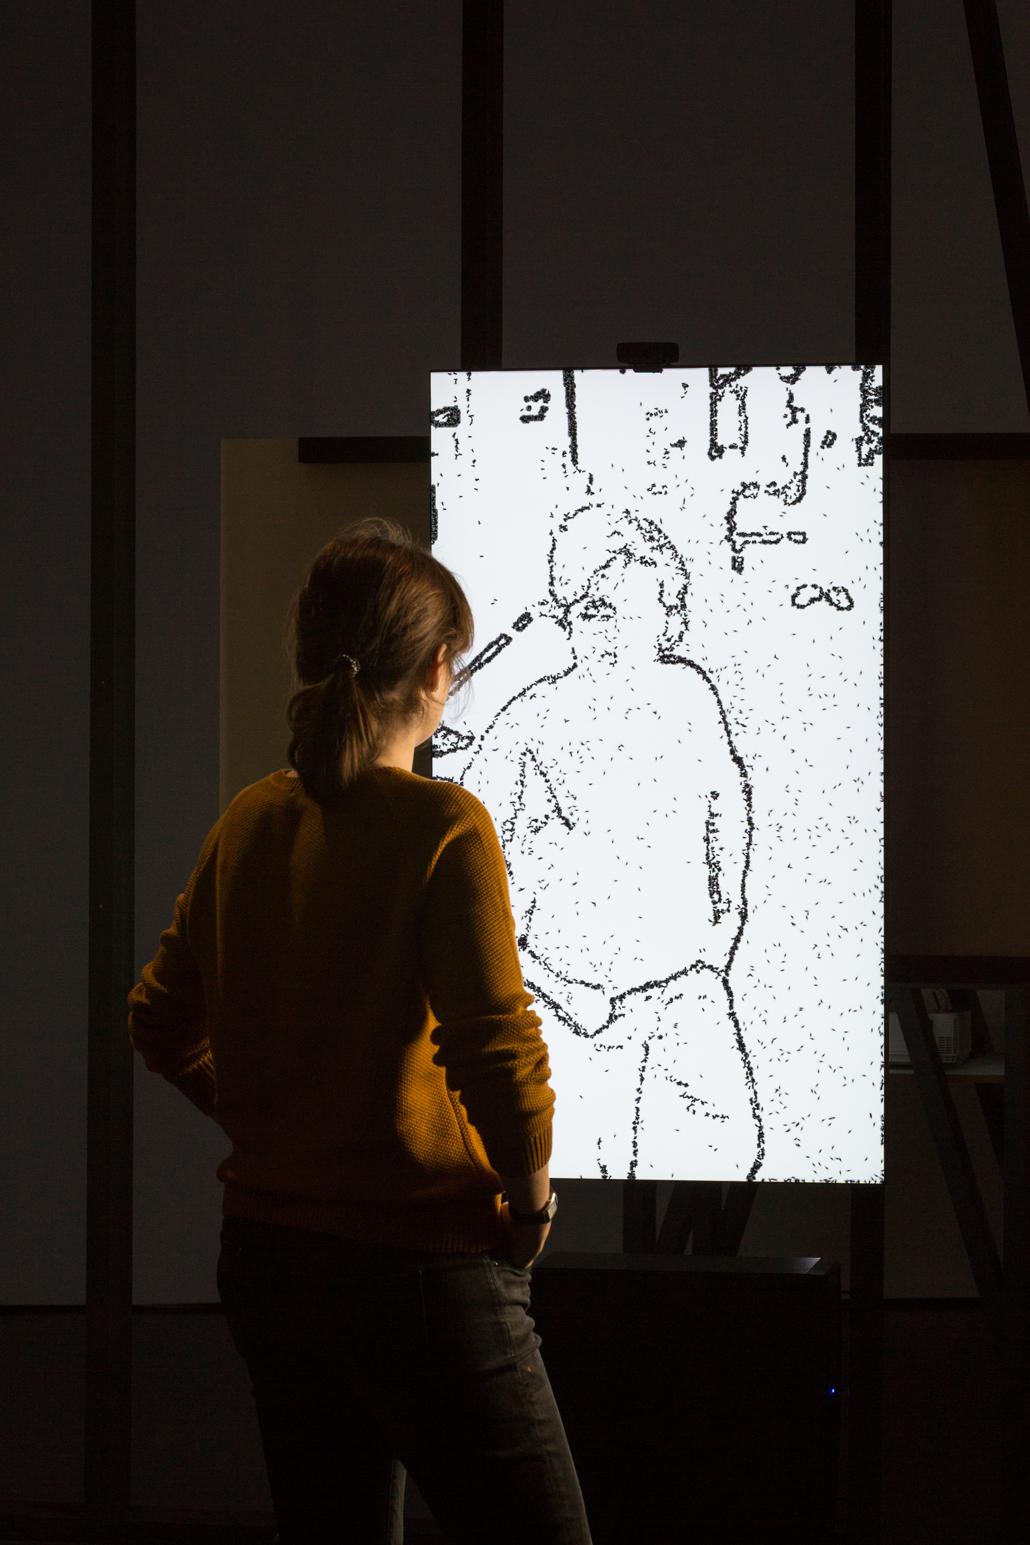 A person stands in front of a drawing of a person